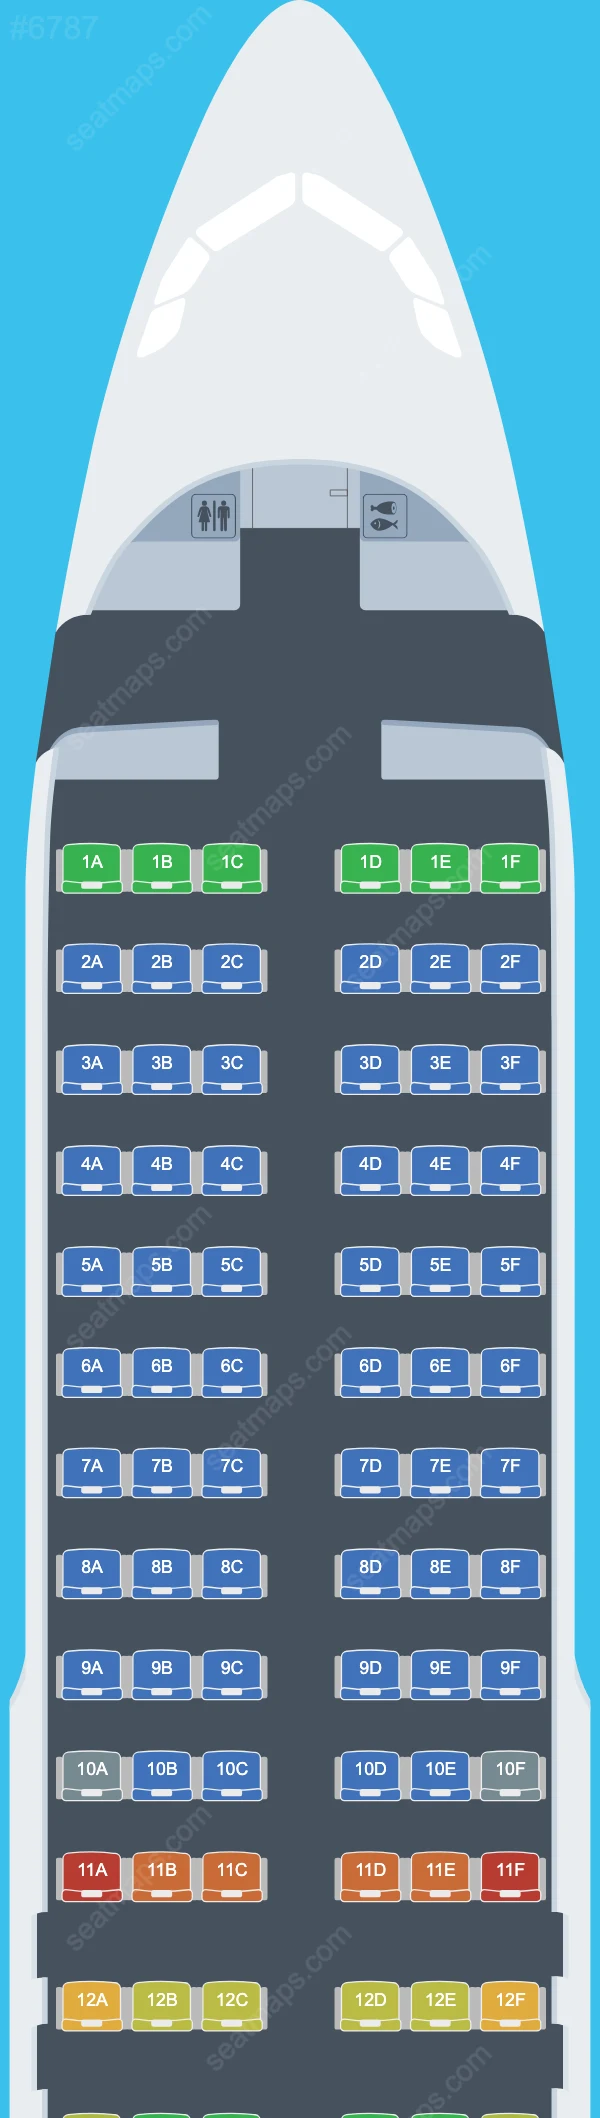 Aruba Airlines Airbus A320 Seat Maps A320-200 V.1